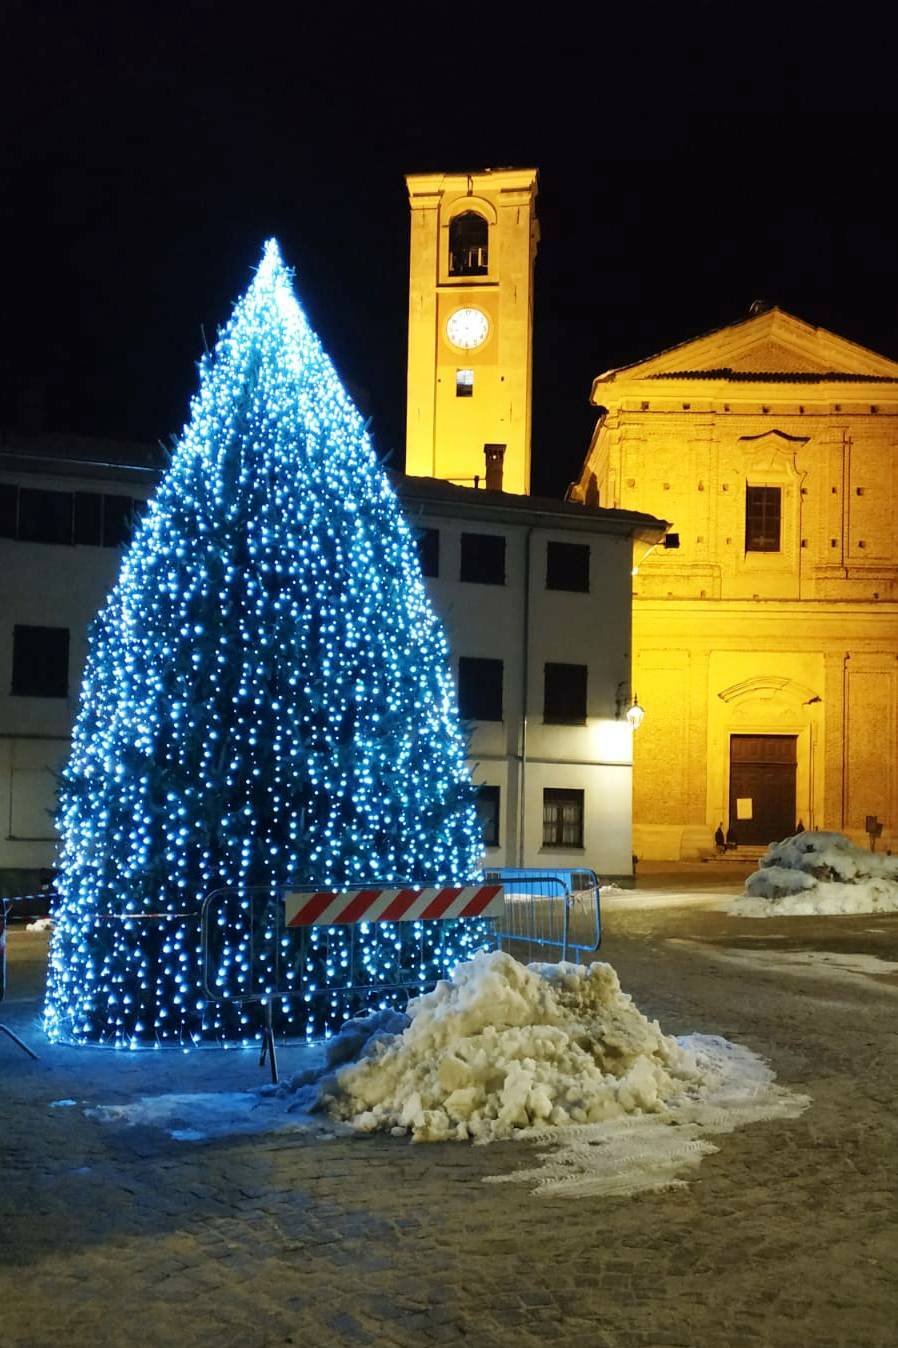 Beinette, accese le luminarie natalizie